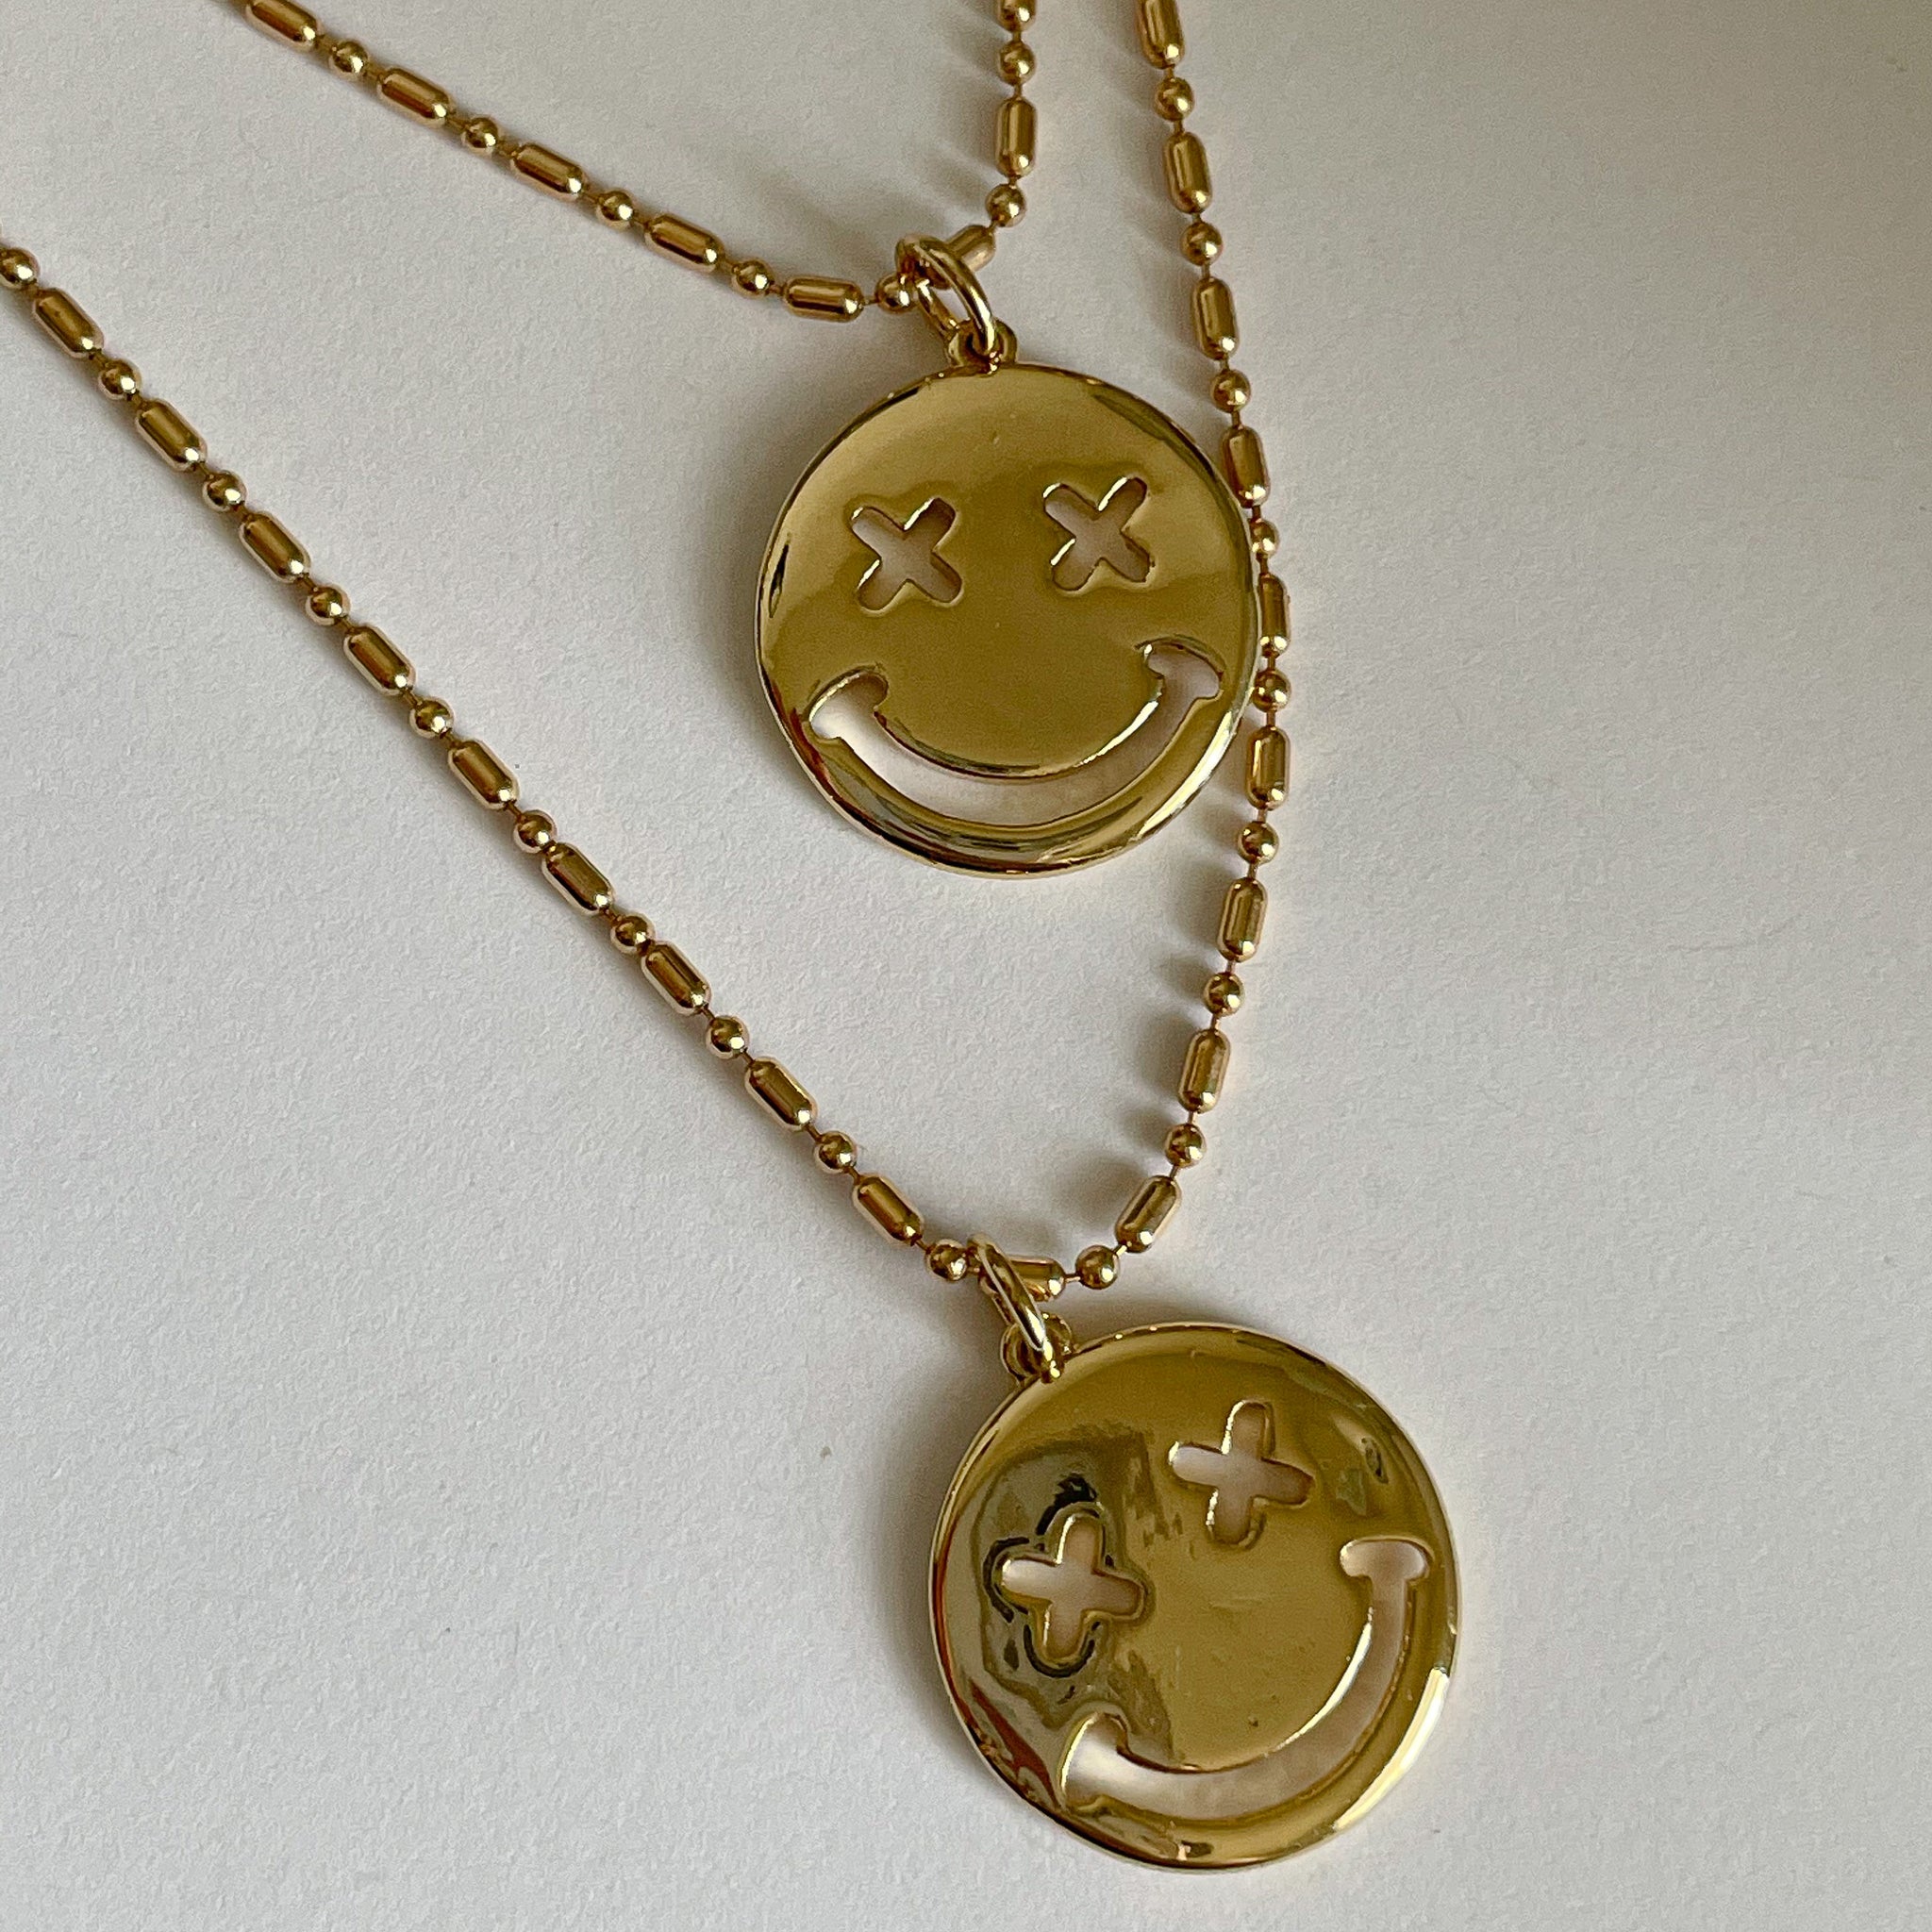 Smiley Face Necklace, Gold Filled, Emoji Necklace, Layering Necklace, Link  Chain, Dainty Necklace, Trendy Necklace, Birthday Gift - Etsy